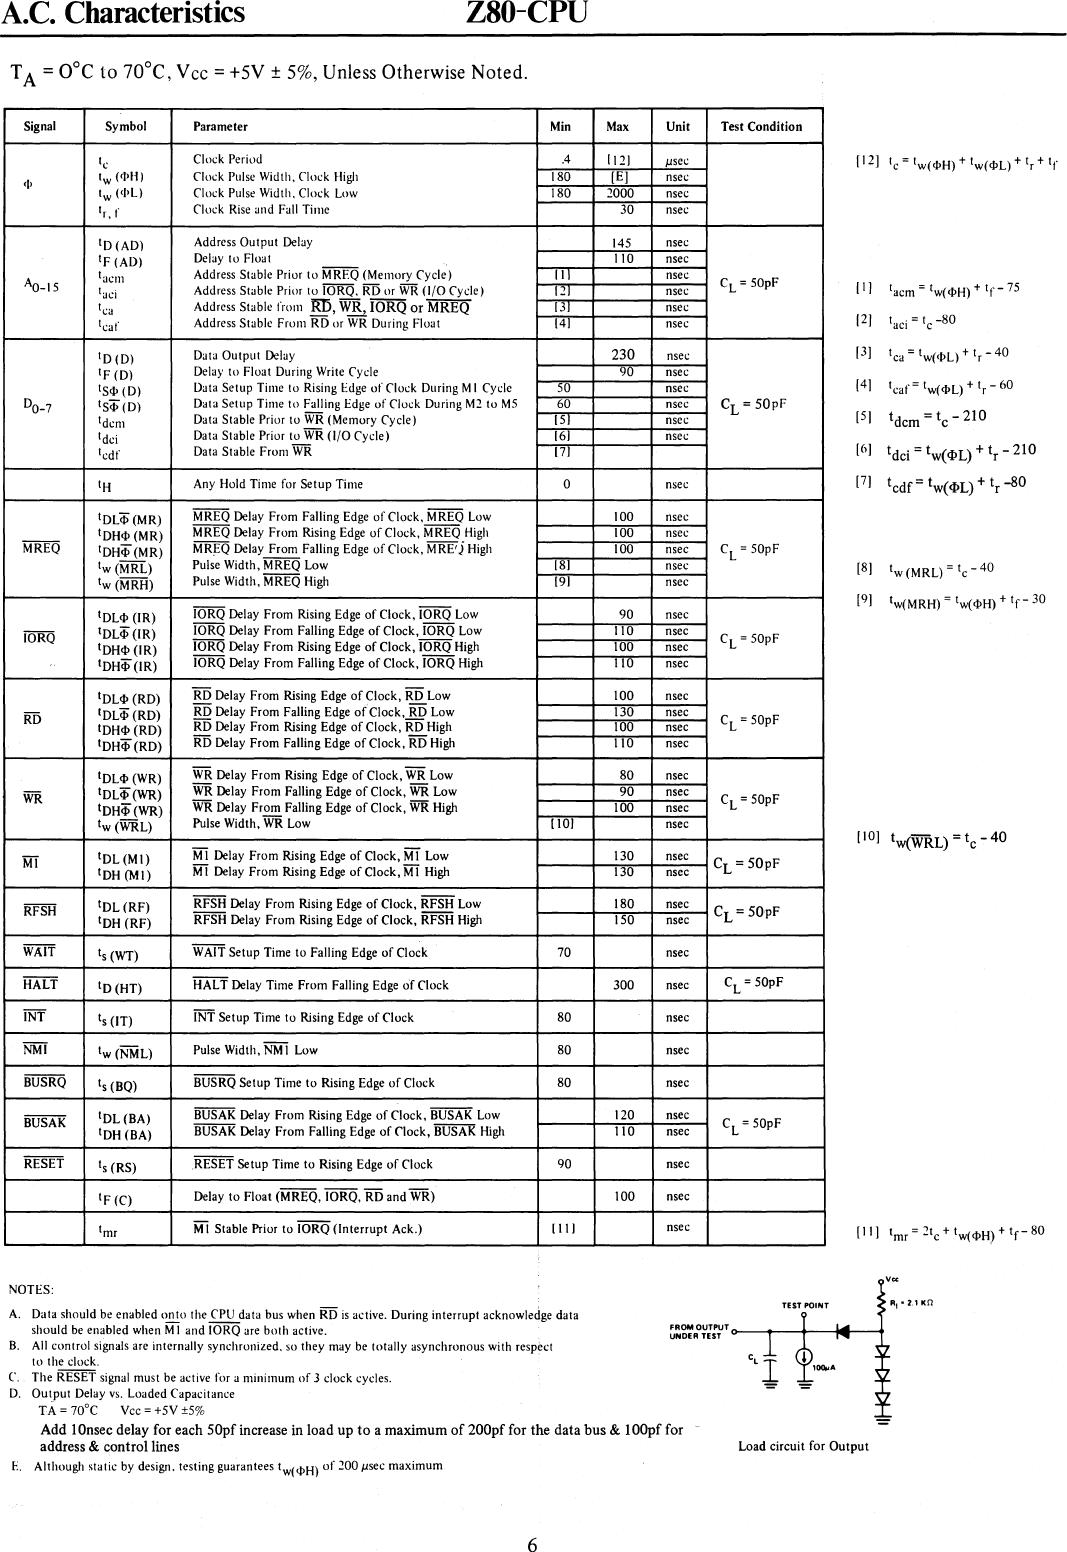 Page 6 of 10 - 03-0027-02_Z80_CPU_Product_Specification_Mar78 03-0027-02 Z80 CPU Product Specification Mar78